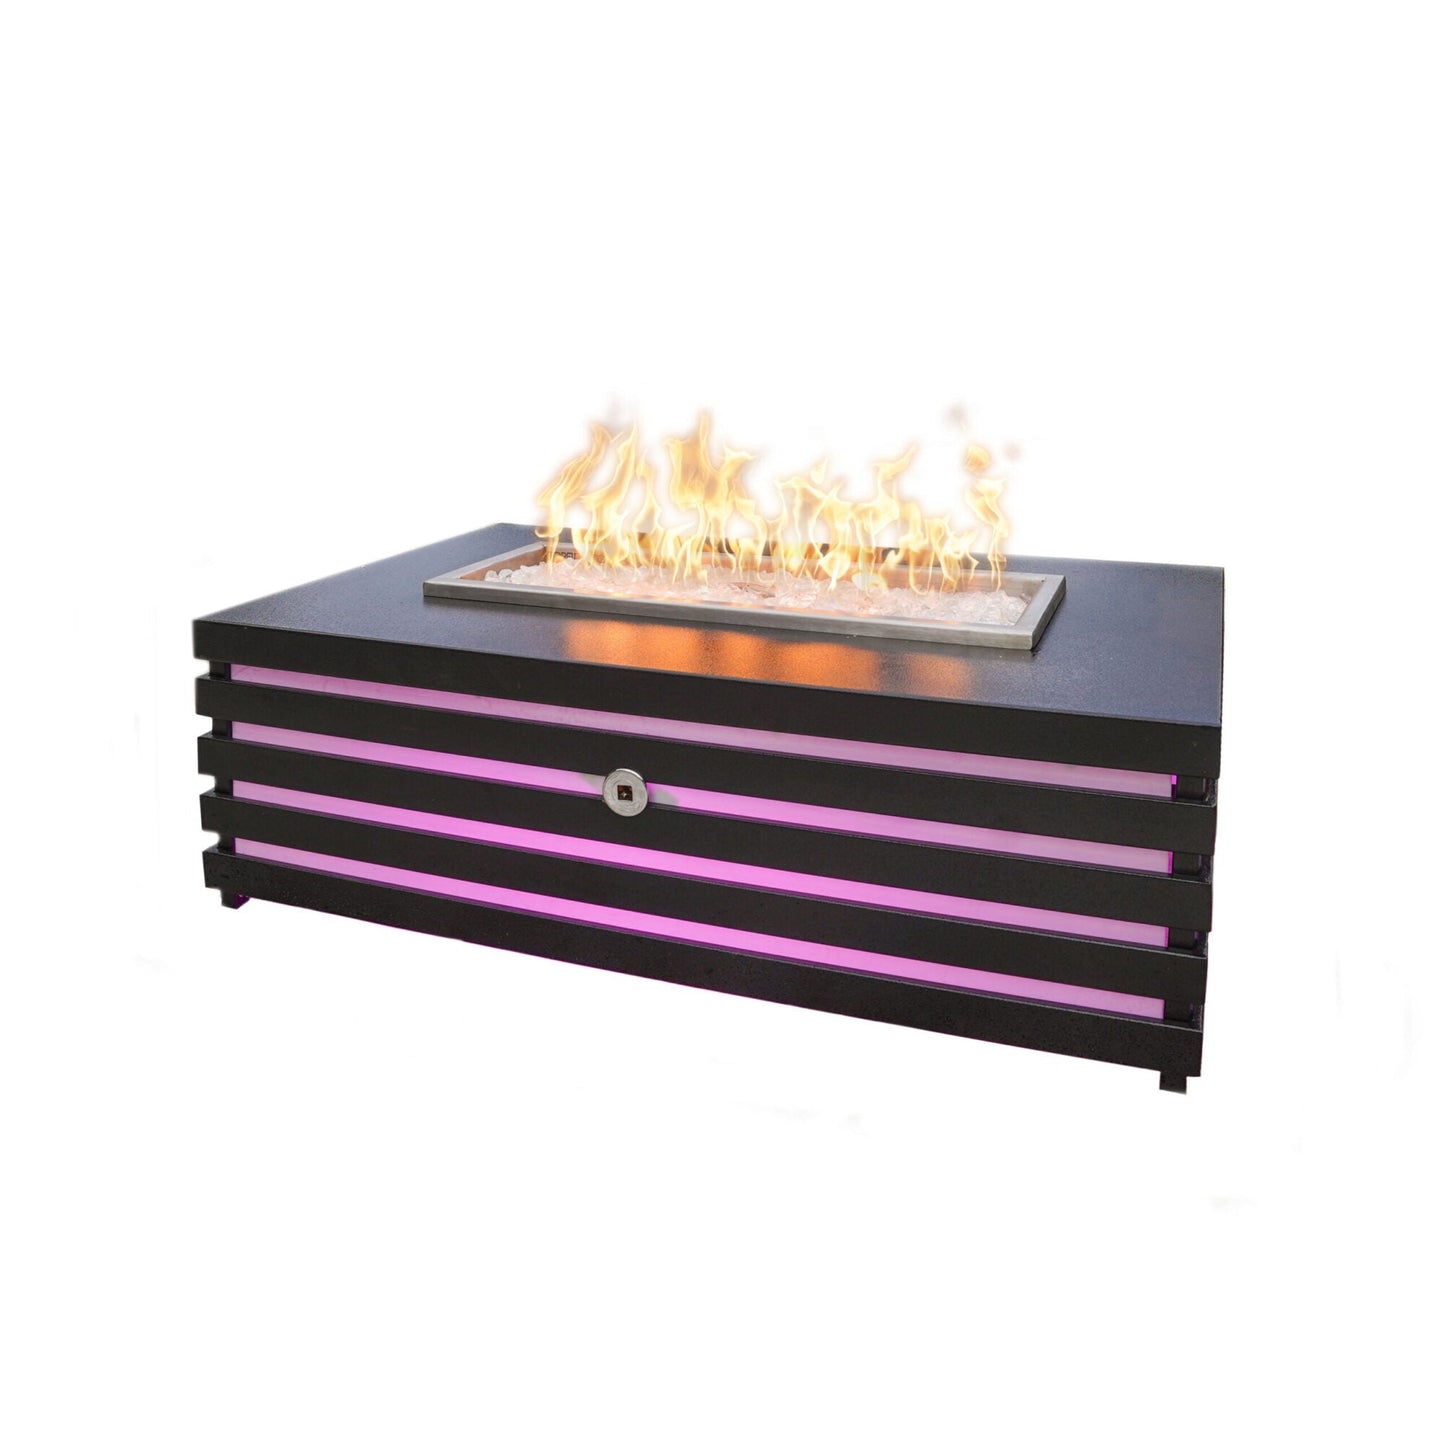 The Outdoor Plus Amina 48" Copper Vein Powder Coated Natural Gas Fire Pit with 110V Electronic Ignition